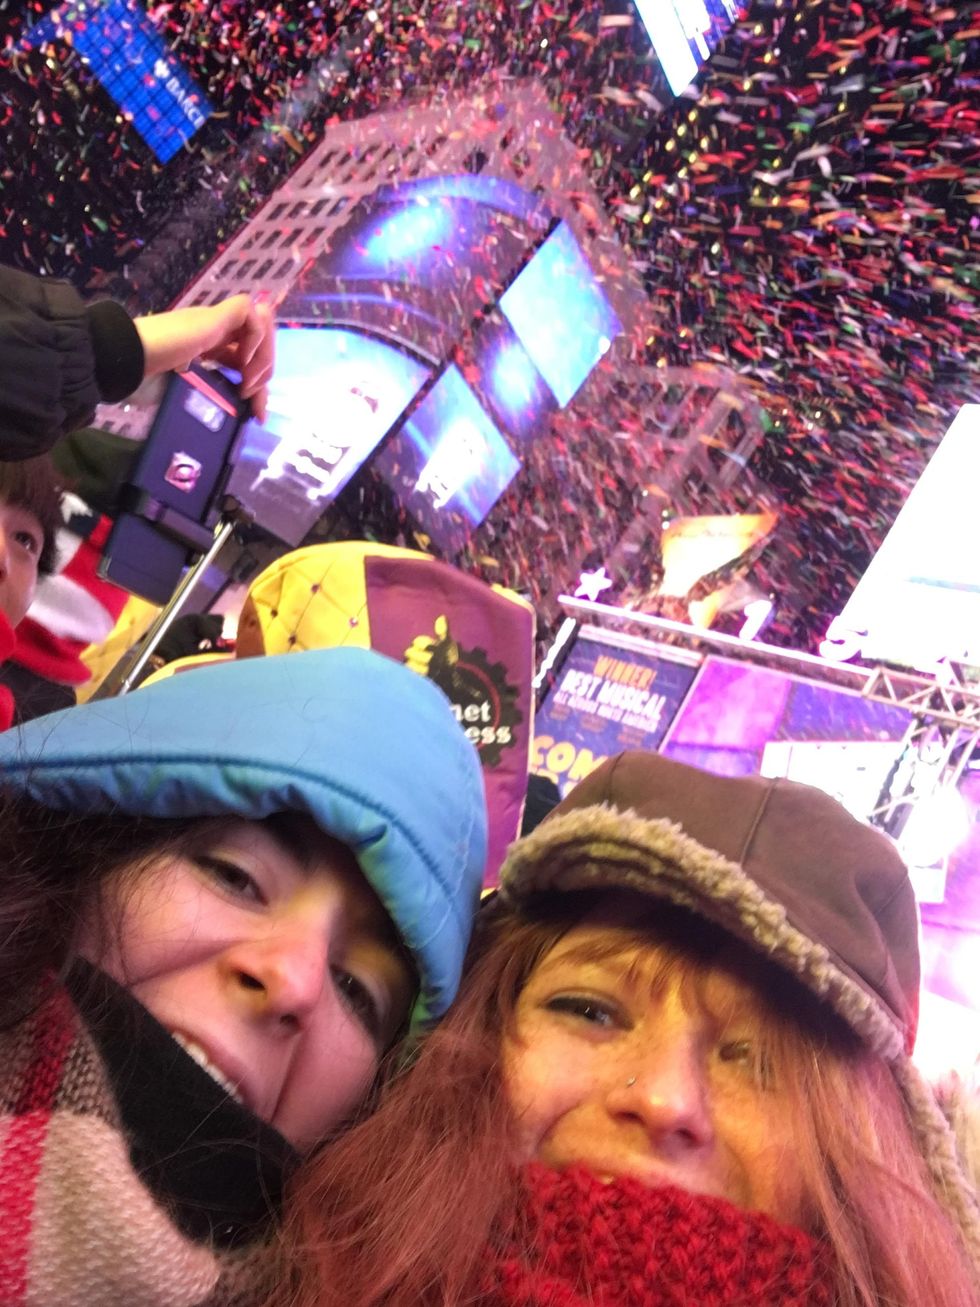 My New Year’s Eve In New York City Ball Drop Experience